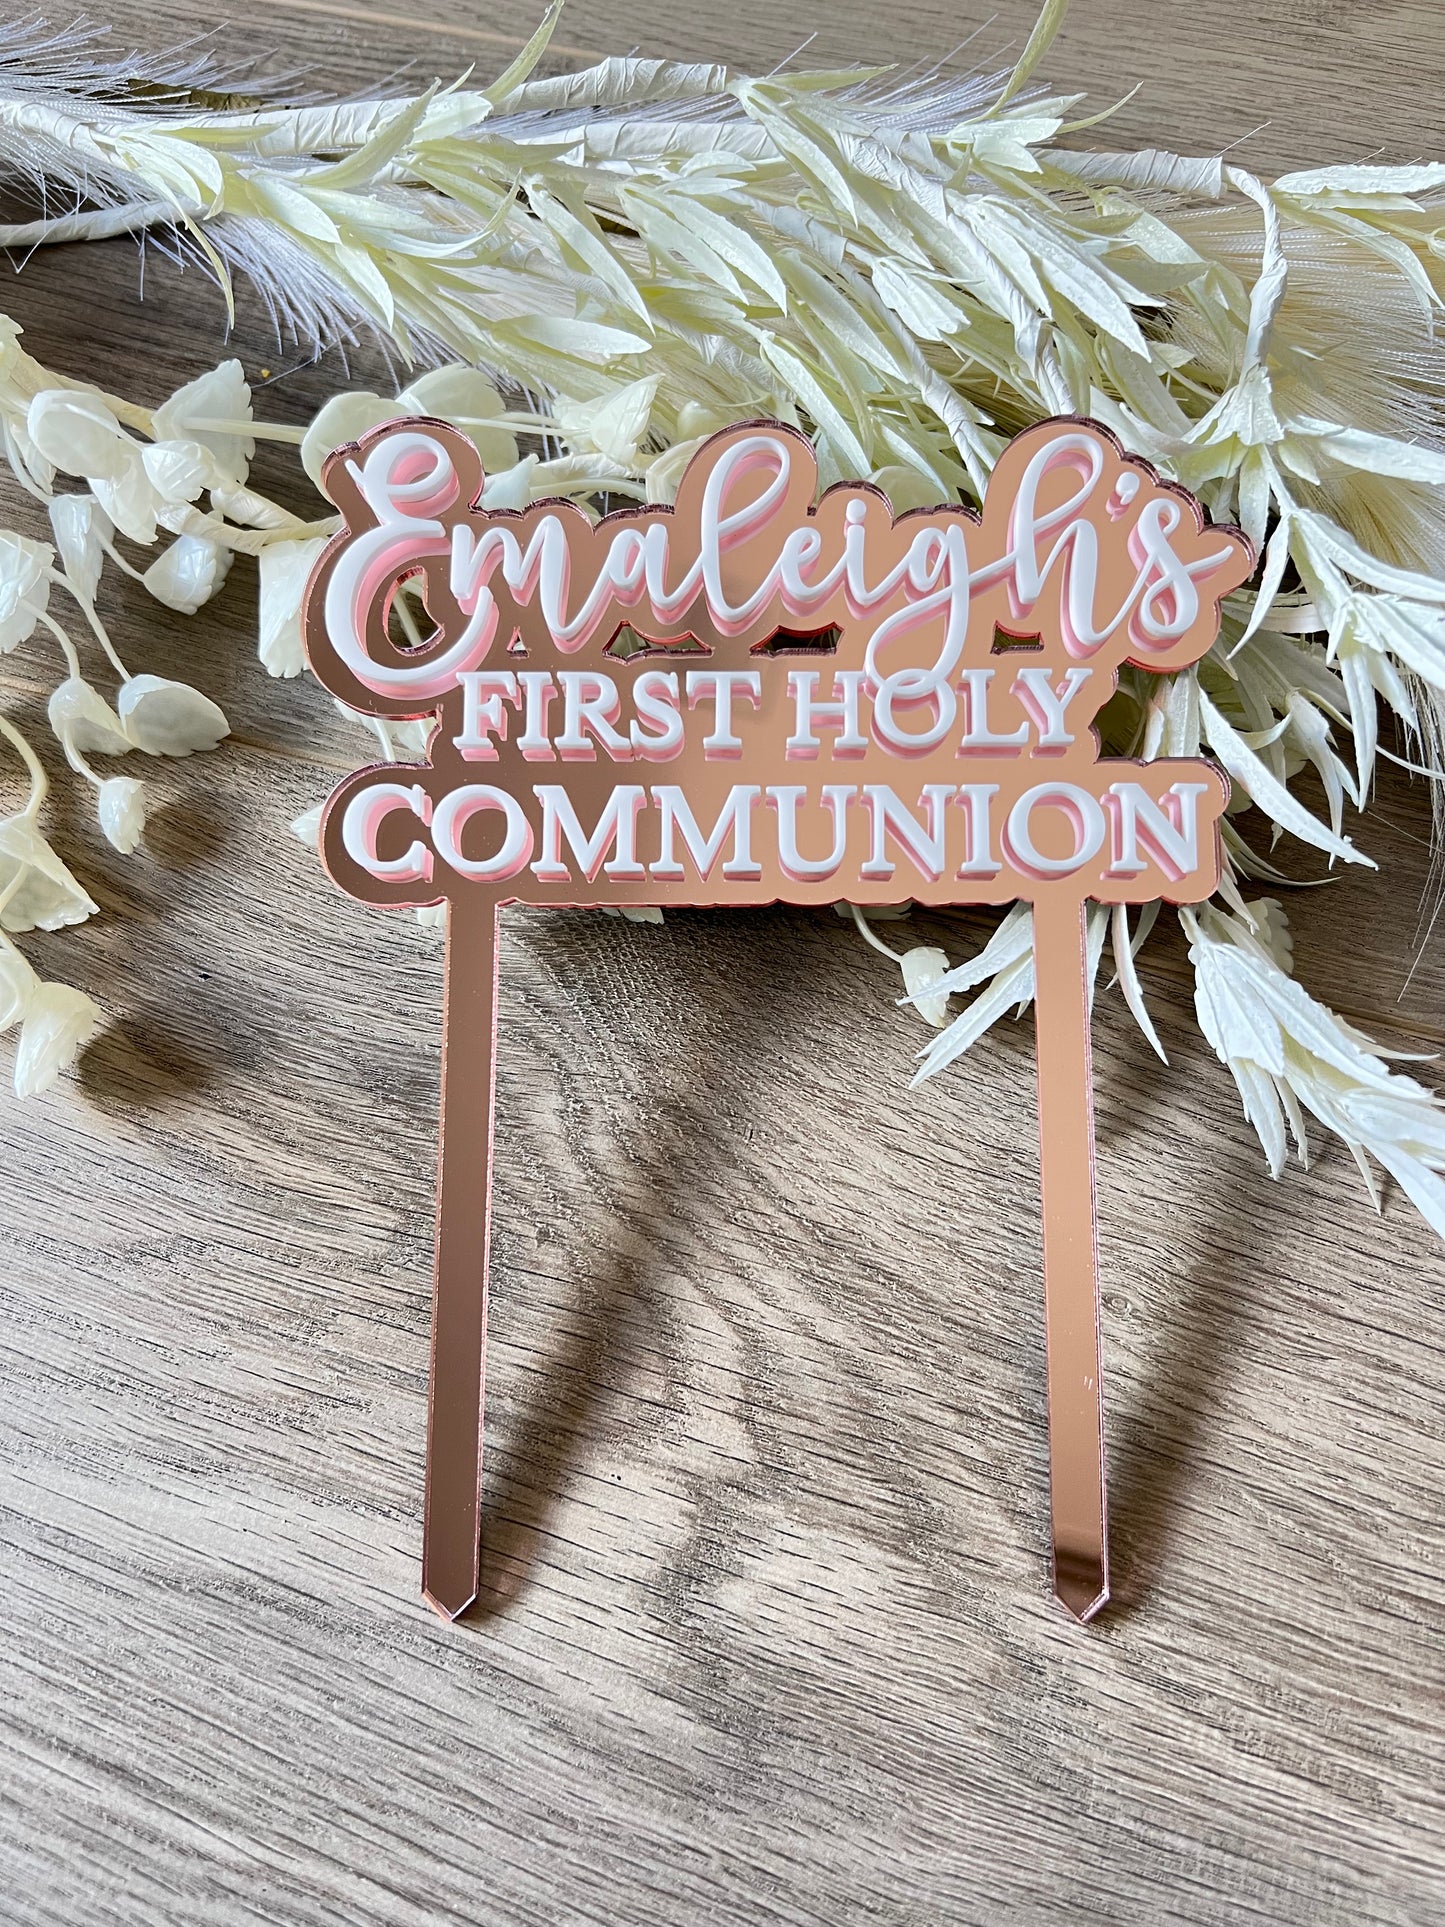 Large 2 Layer Acrylic Cake Topper (15cm)